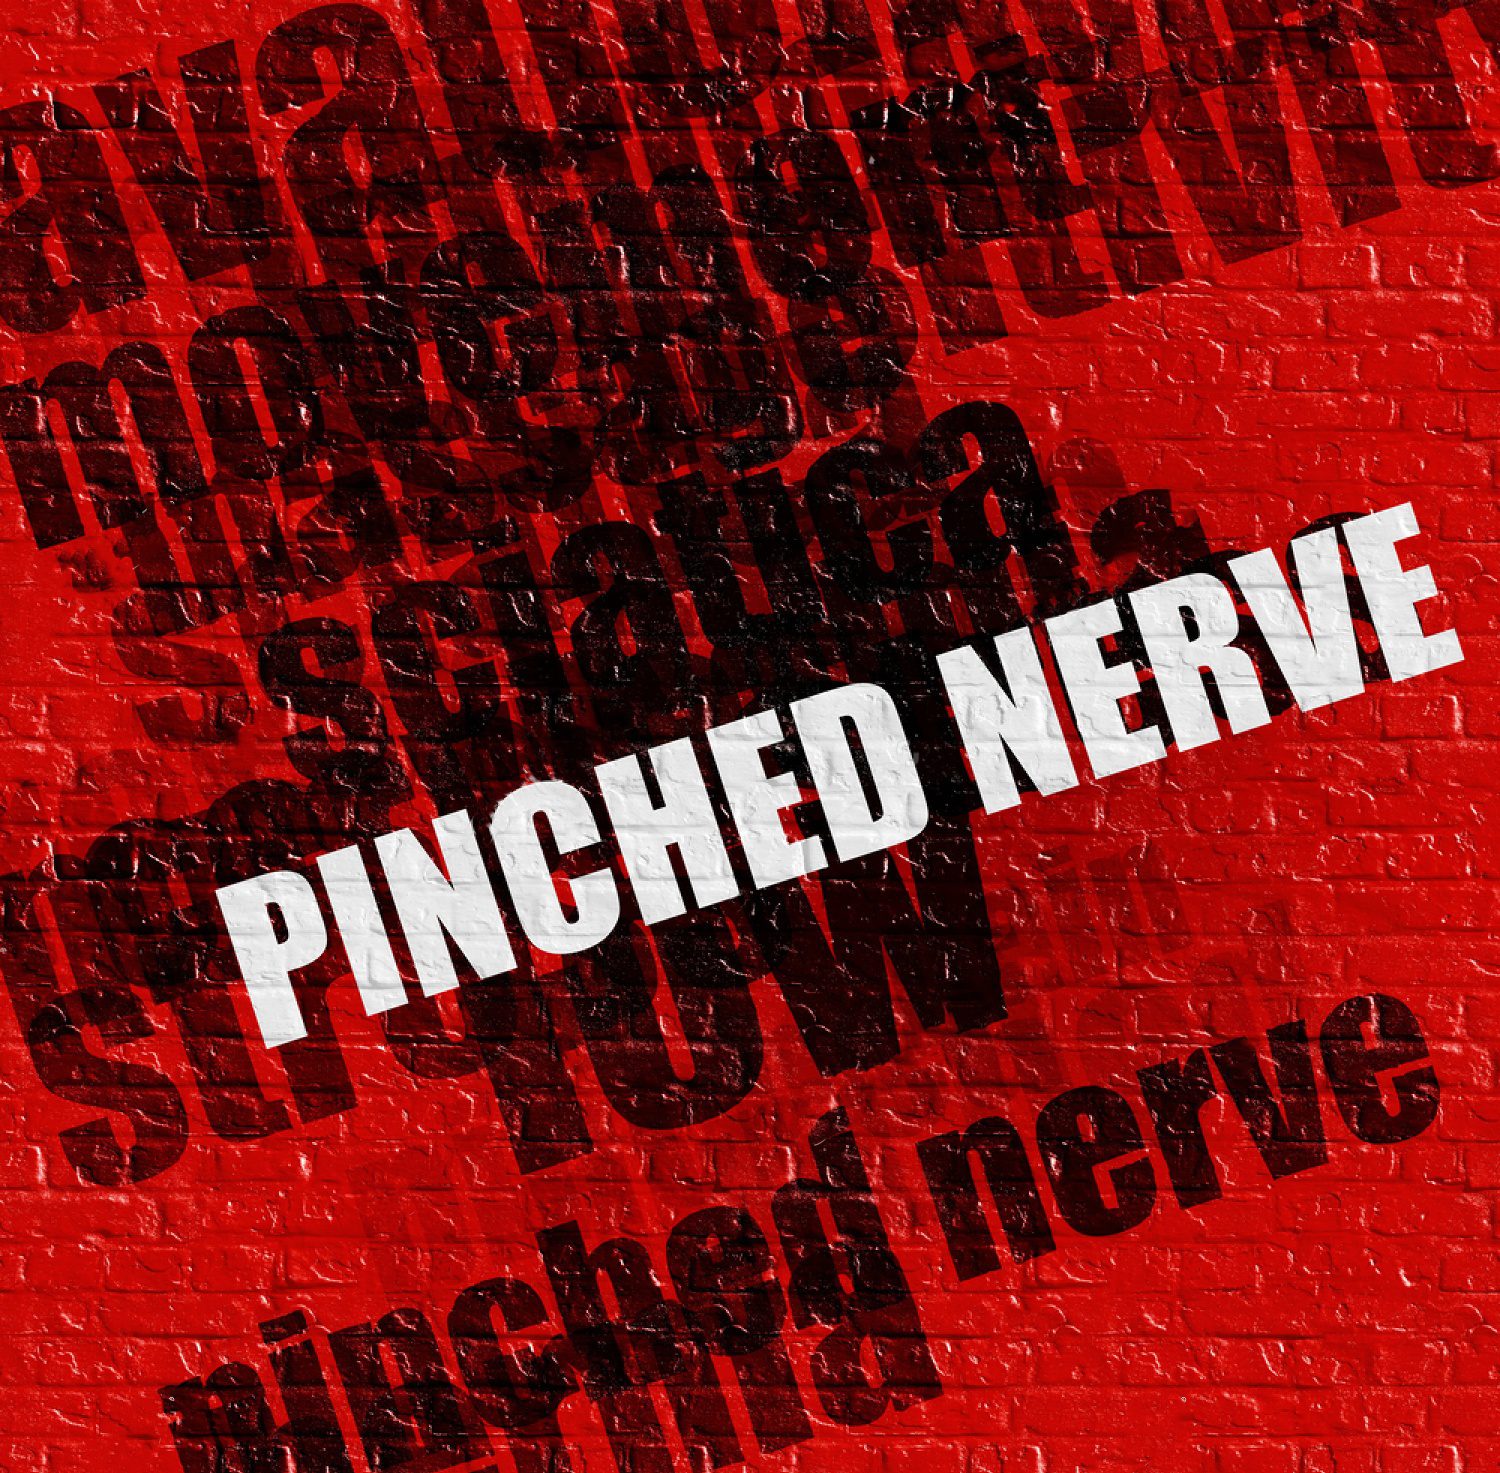 pinched nerve